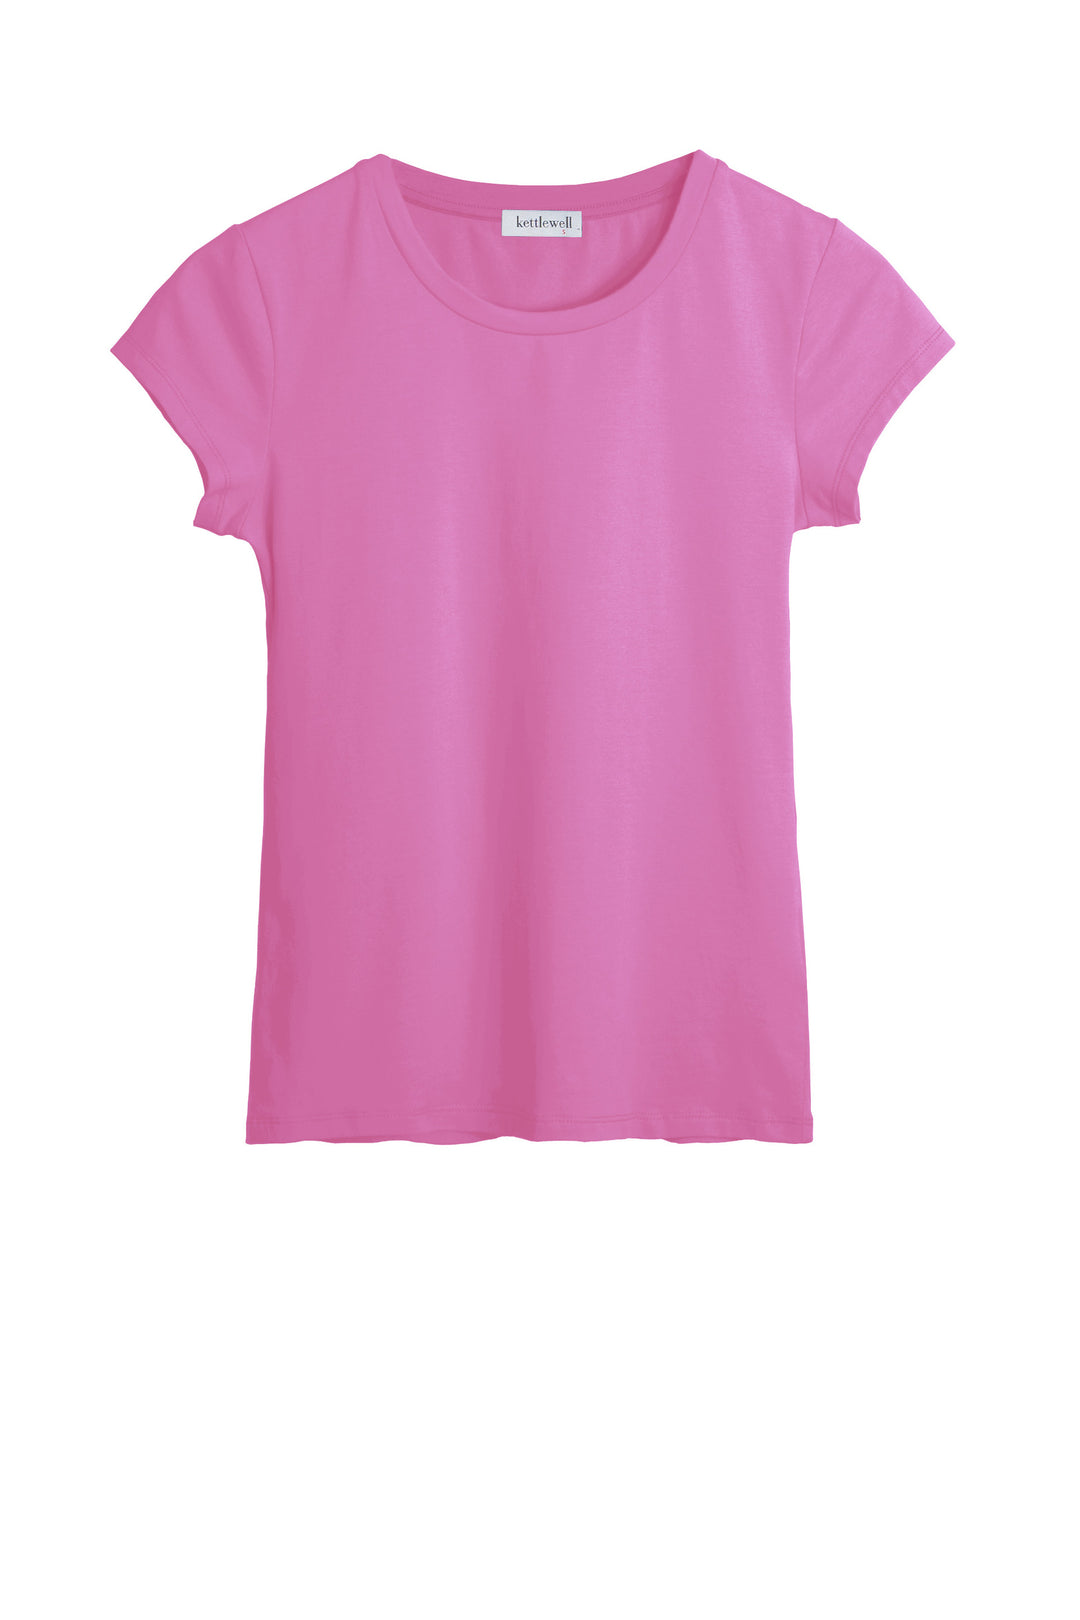 Kettlewell Everyday Cotton Tee - Smokey Orchid